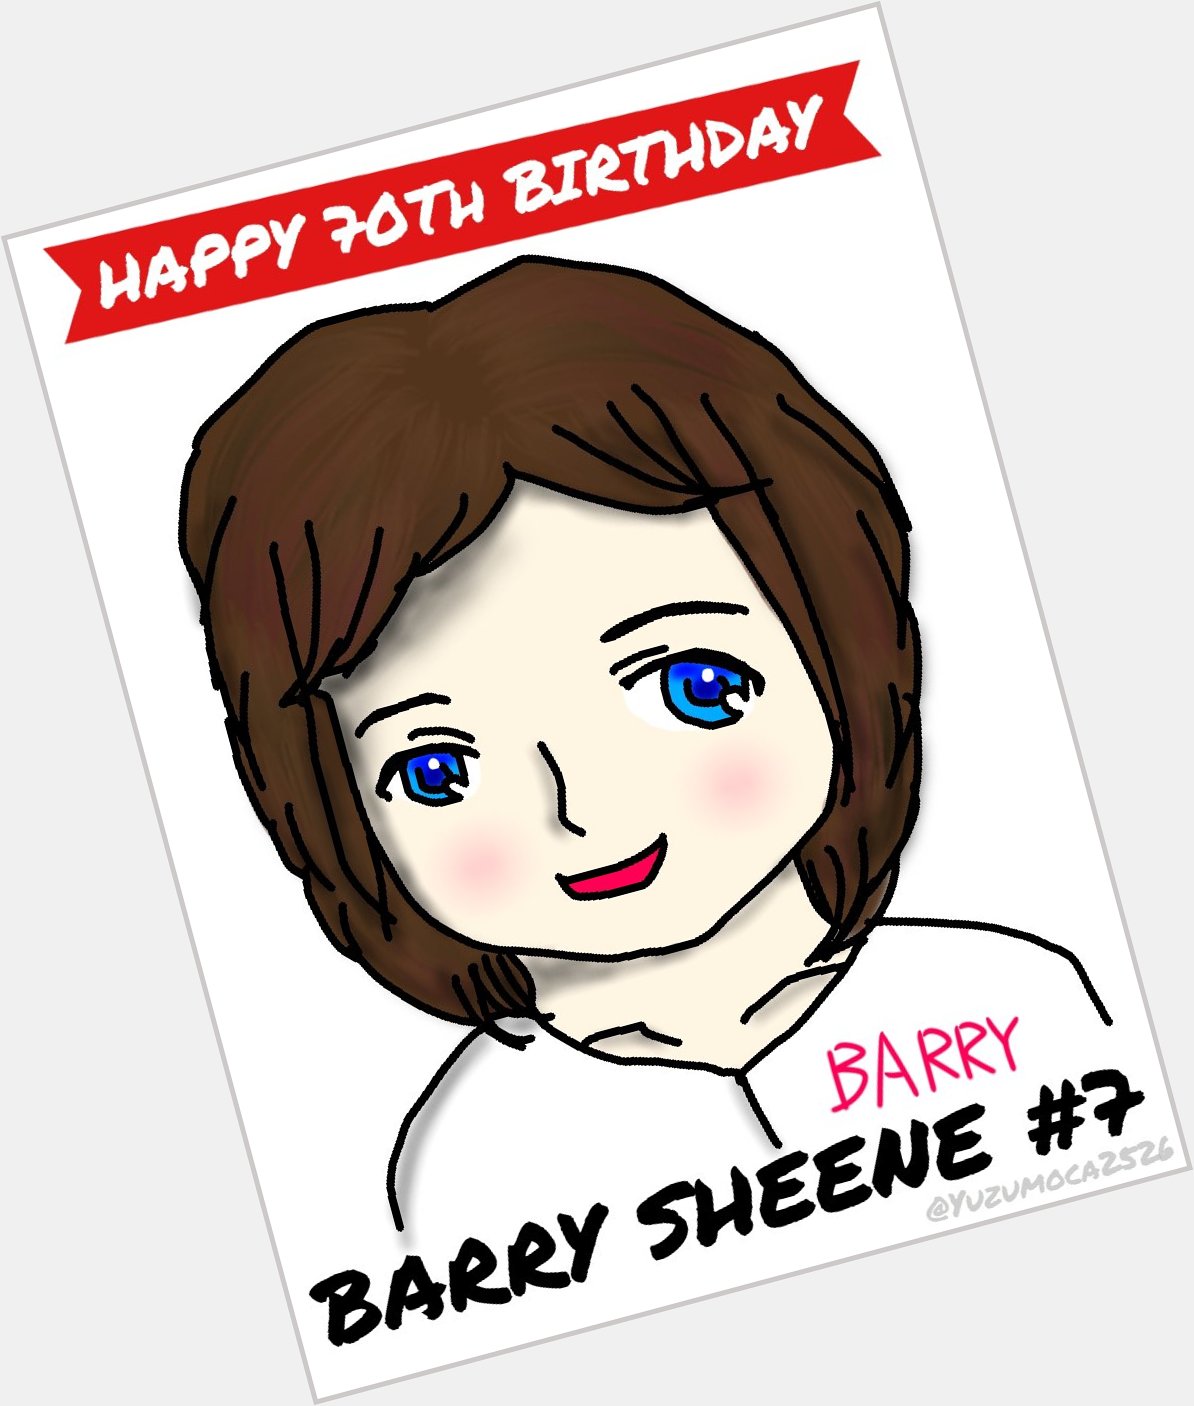 Happy Birthday Barry Sheene He would have been 70 today.

I drew his caricature,but it s not a beautiful picture. 